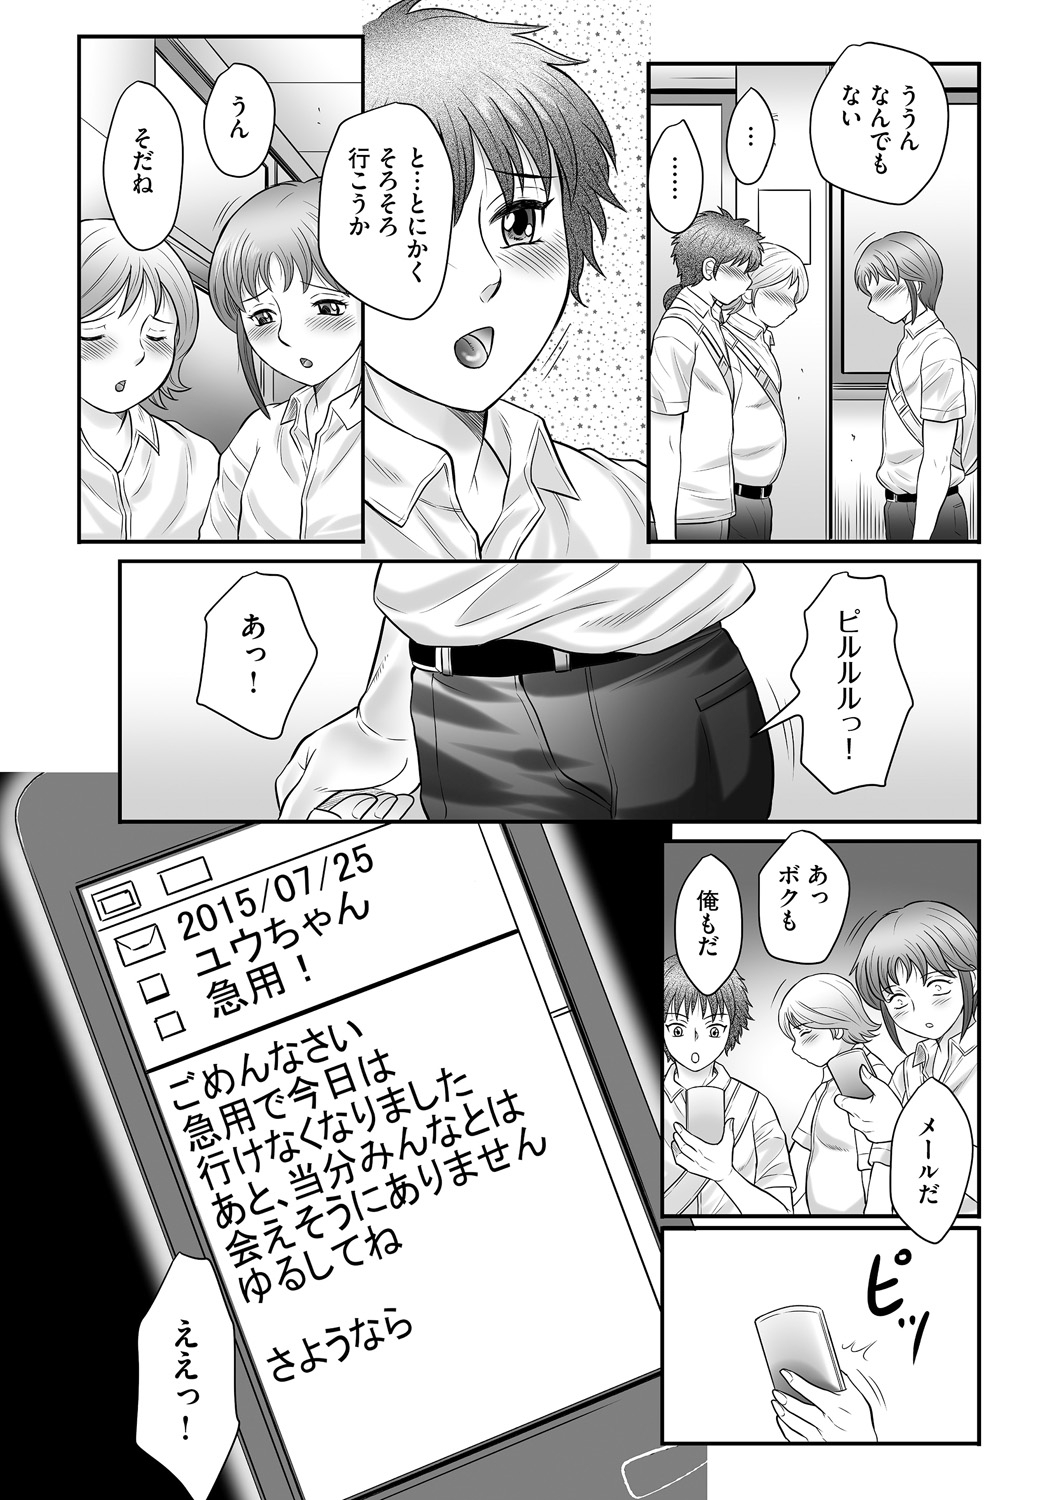 [Fuusen Club] Boshi no Susume - The advice of the mother and child Ch. 17 (Magazine Cyberia Vol. 76) [Digital] page 9 full